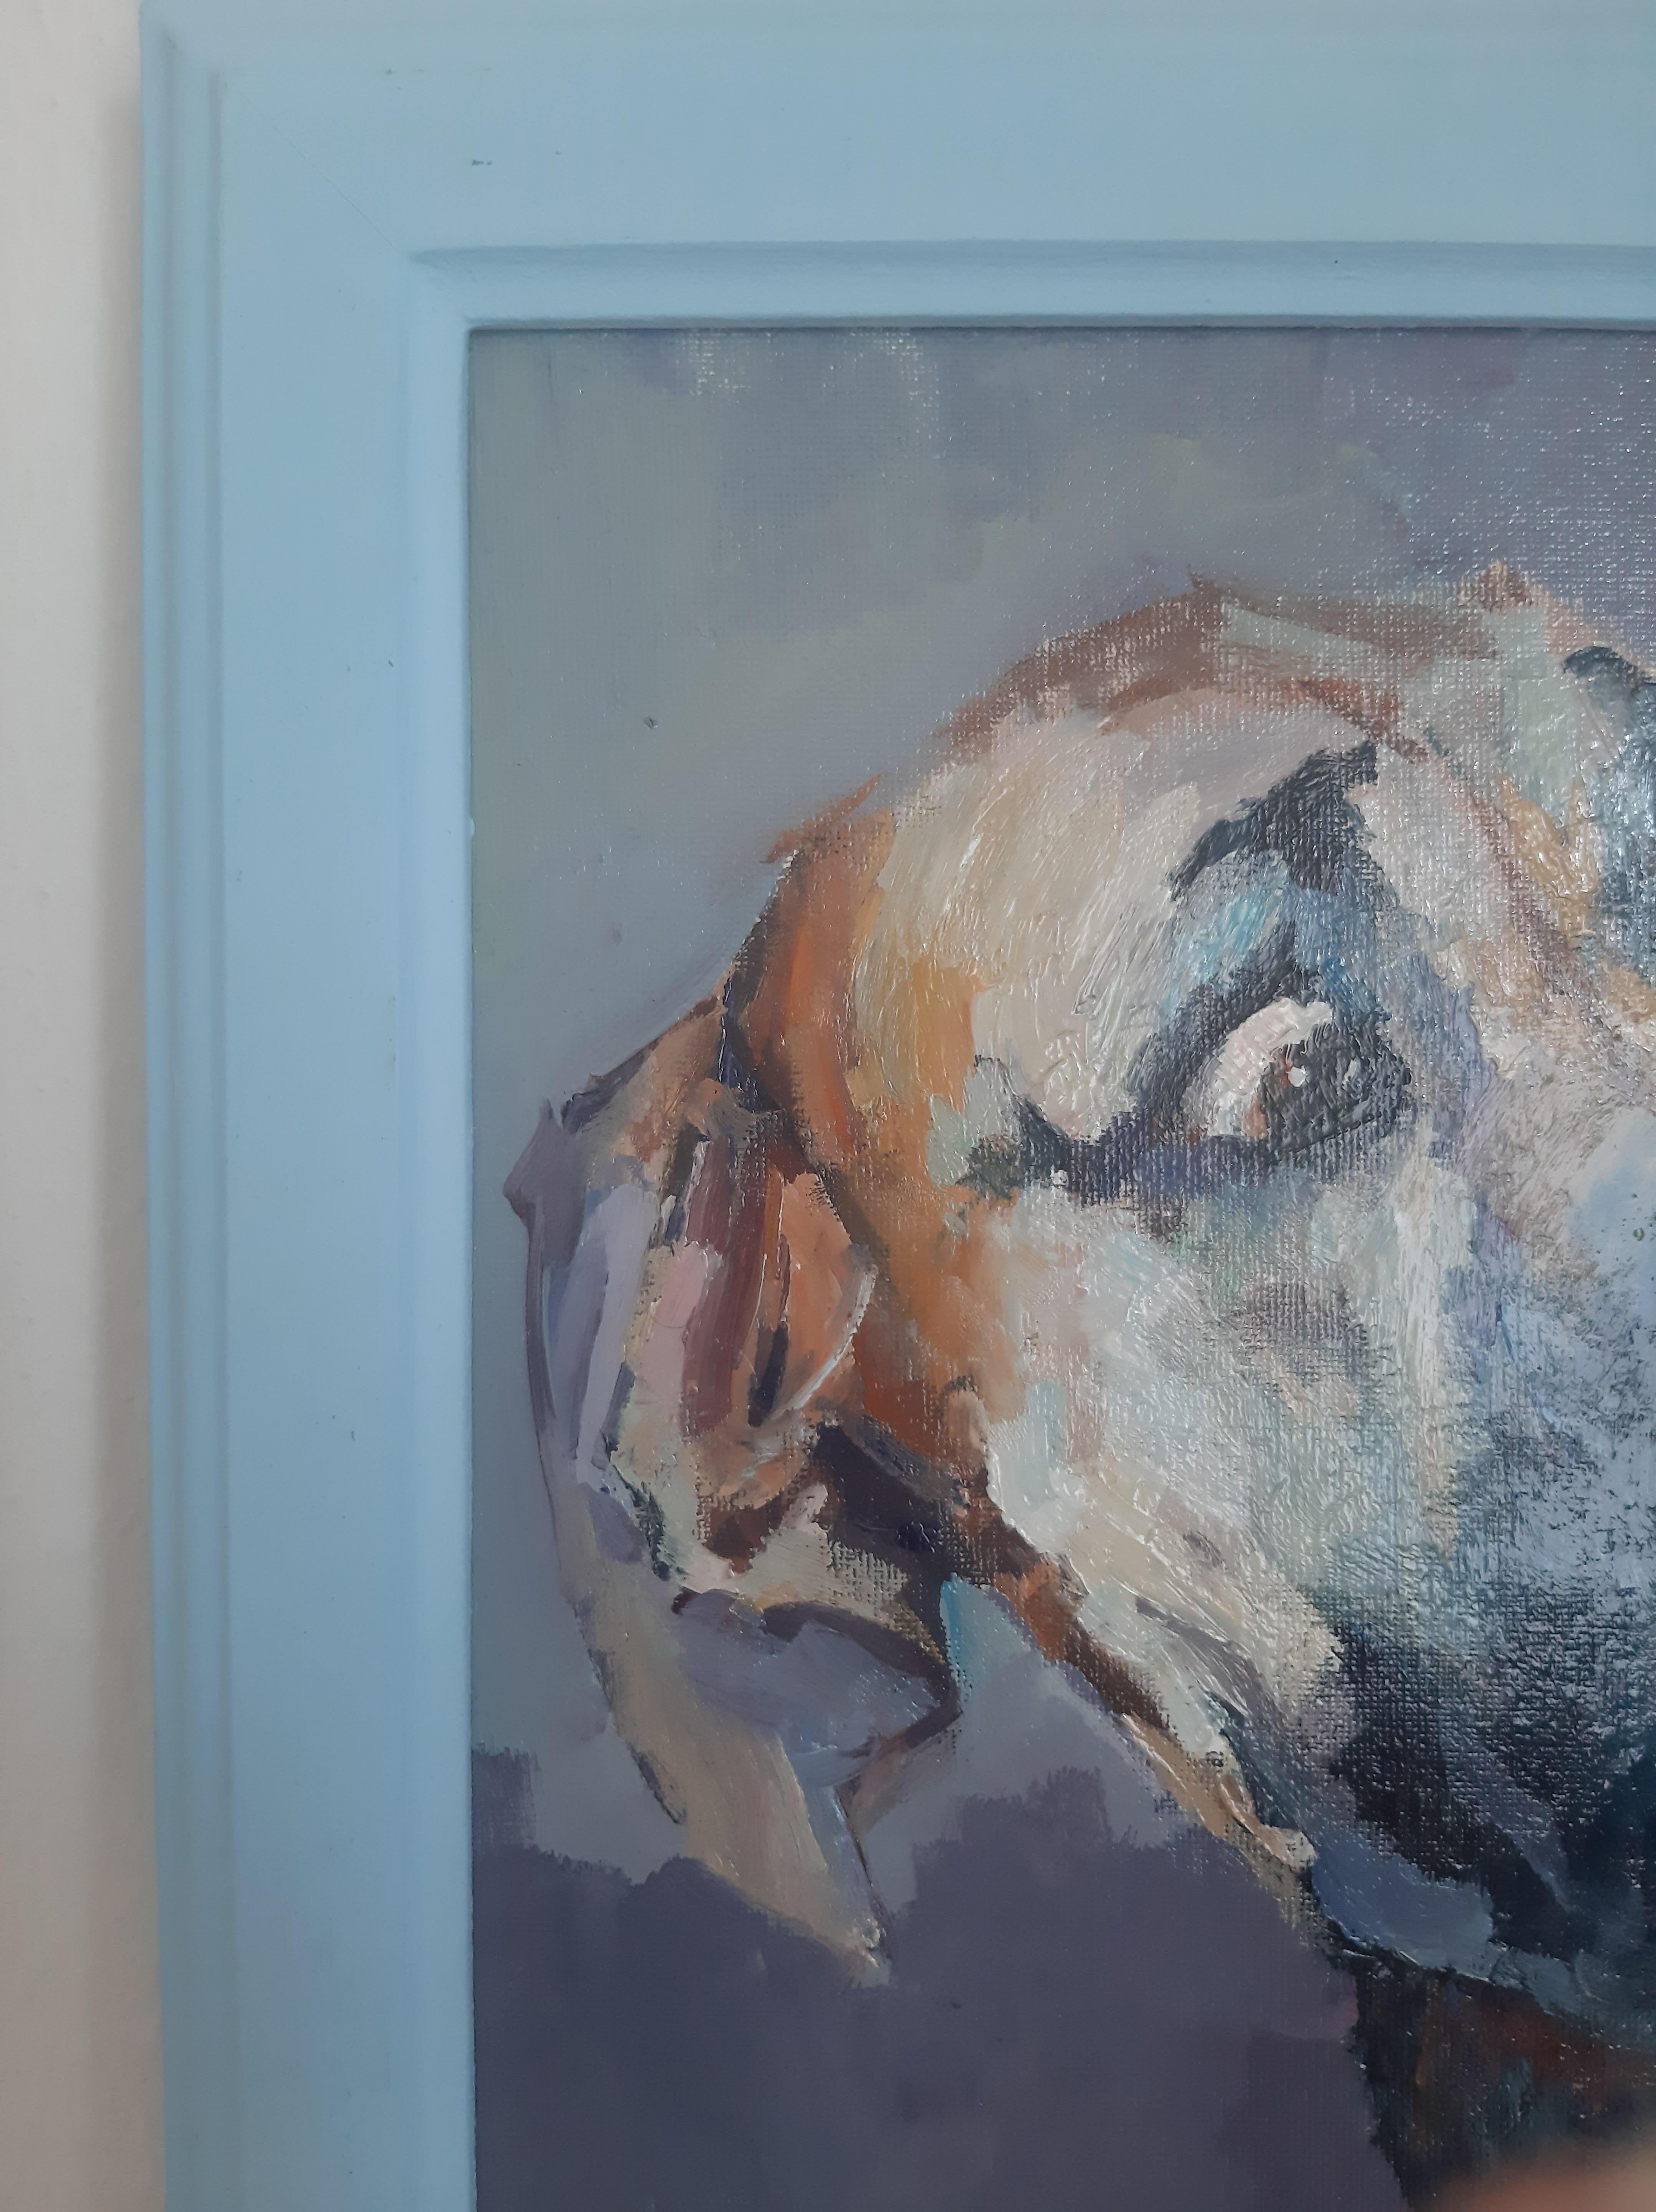 In this painting with a portrait of a dog, we see a focused gaze that seems to breathe with vivid emotions. The animal's face expresses genuine astonishment and bewilderment. The gaze is filled with deep interest as if the dog is attempting to